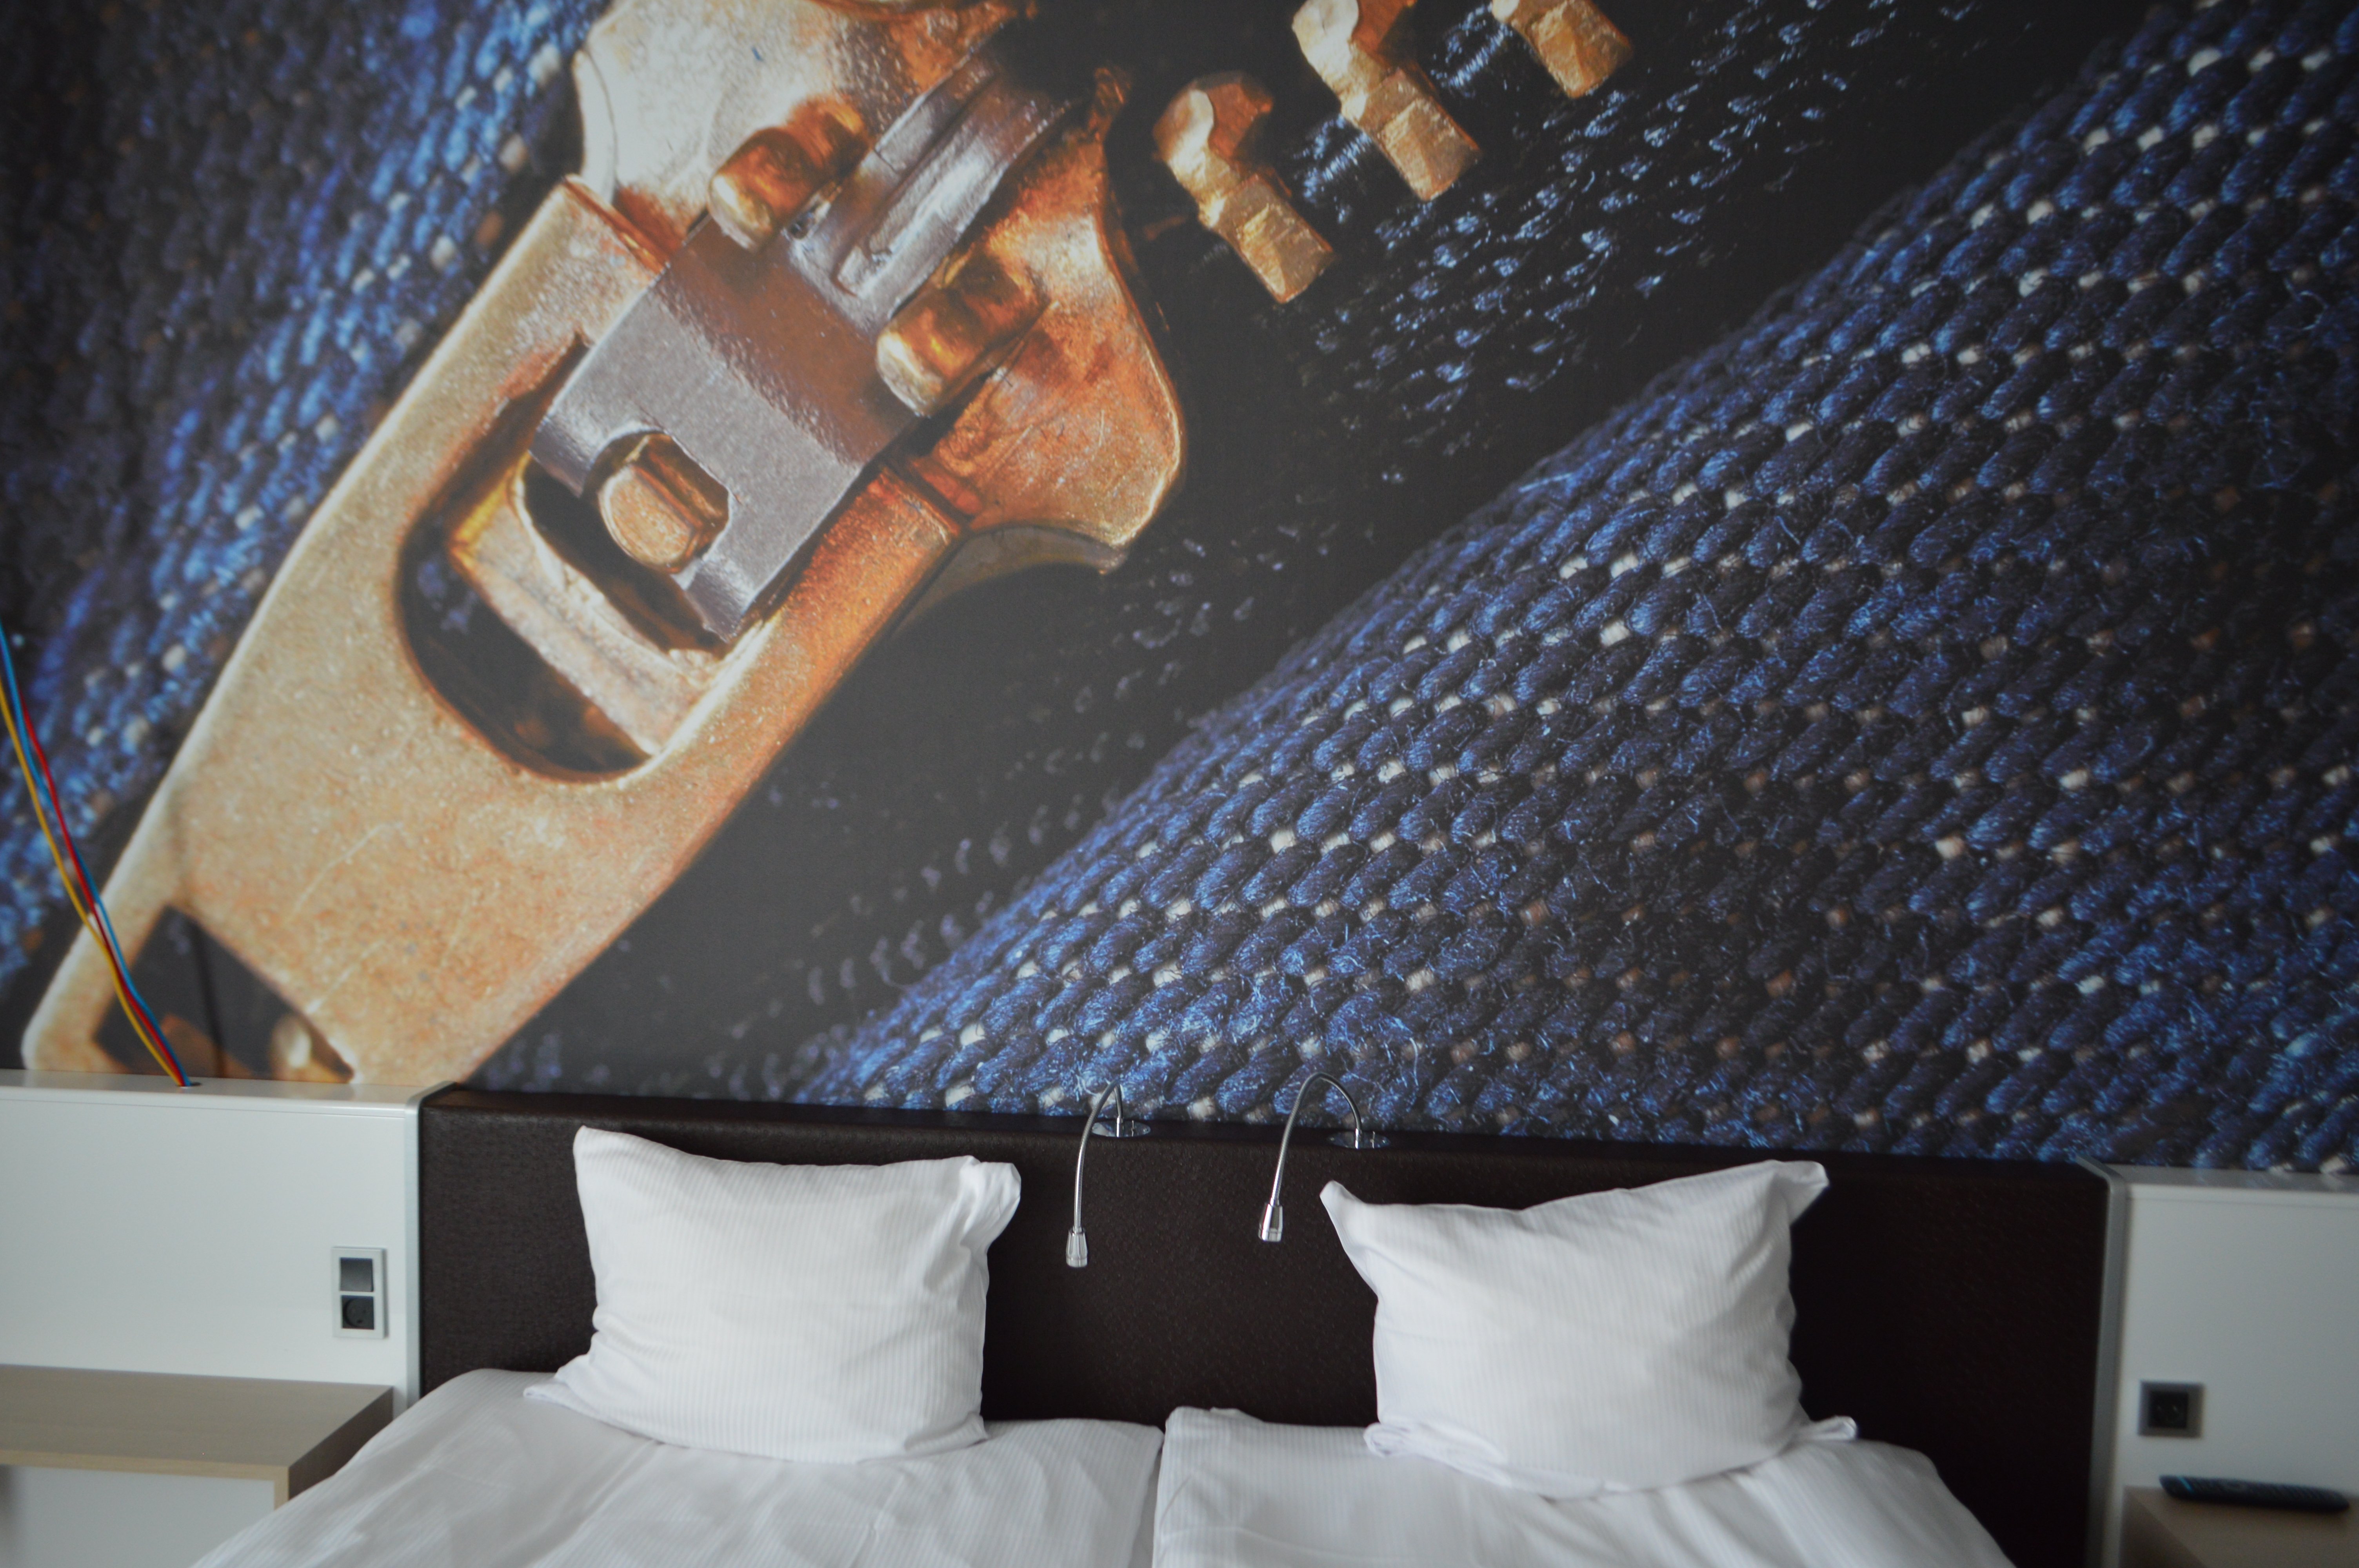 a bed with pillows and a picture of a lock on the wall